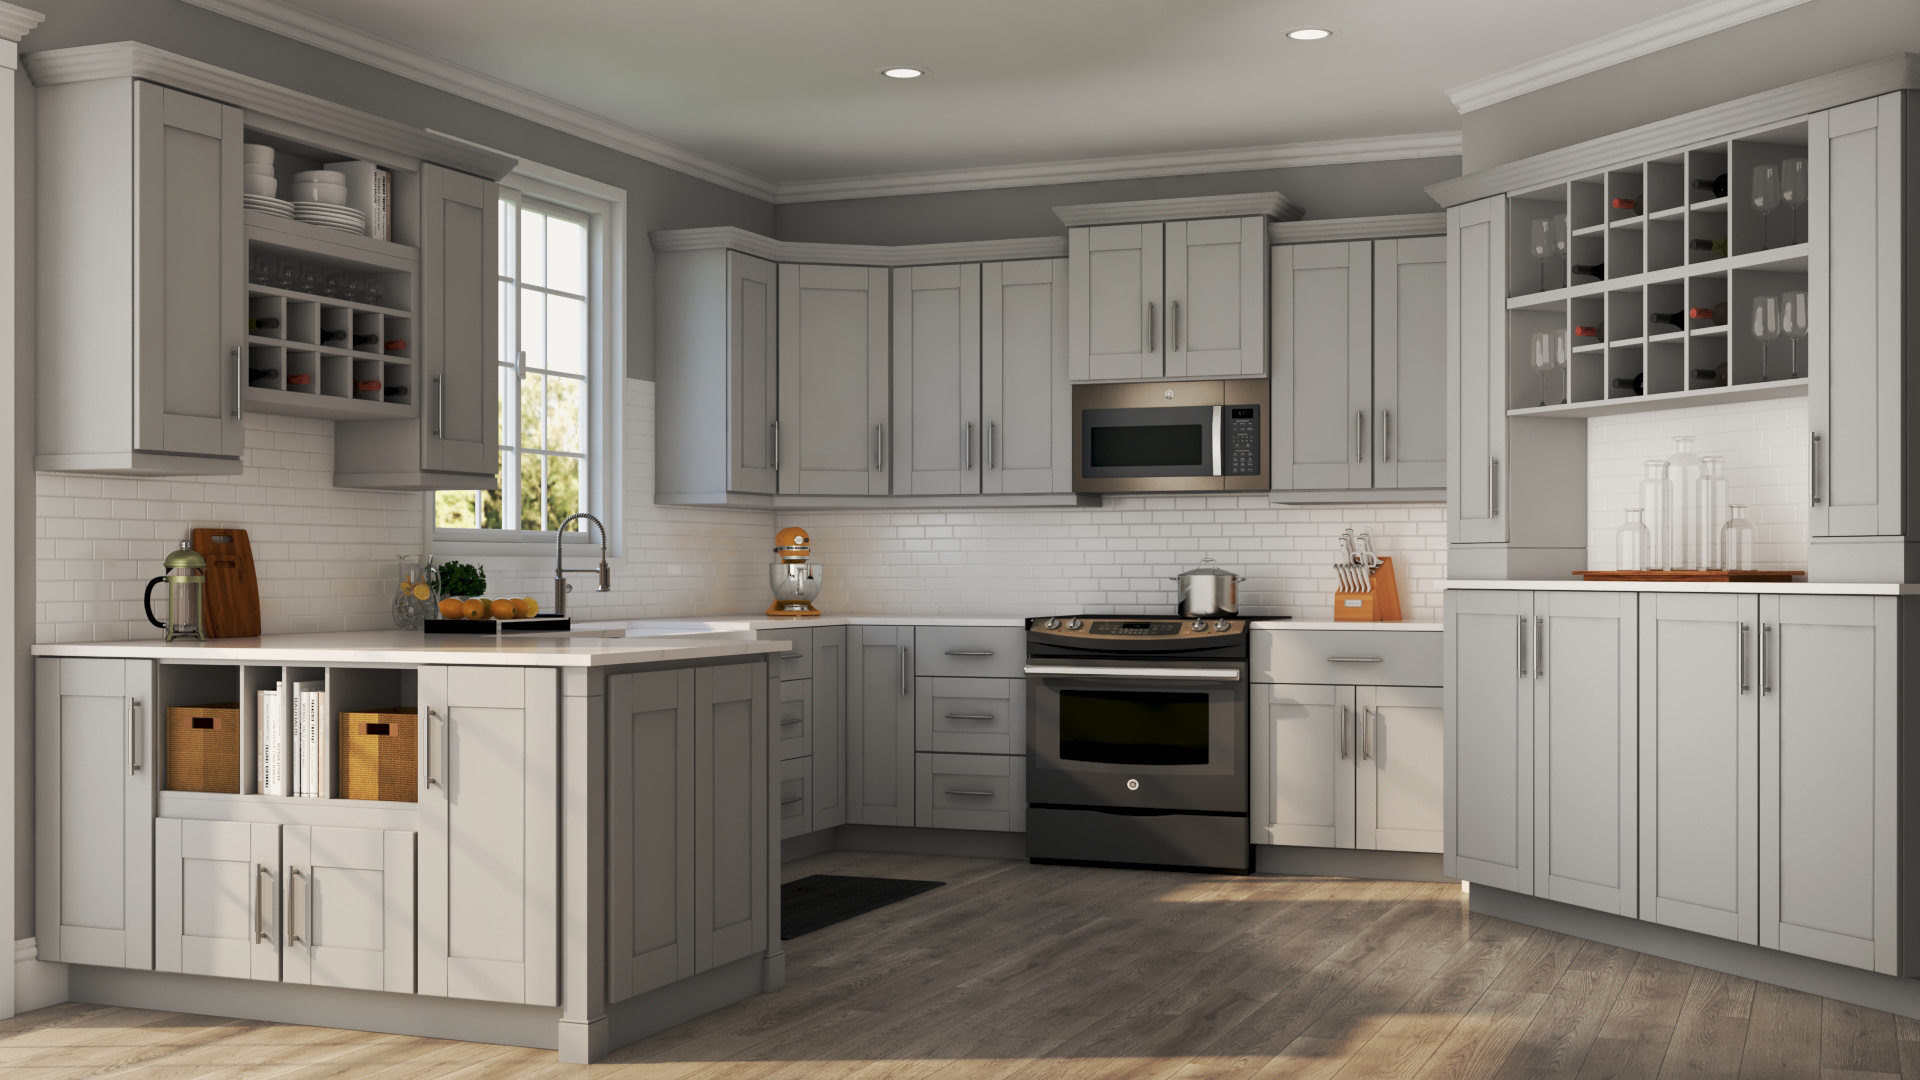  Shaker Base Cabinets in Dove Gray Kitchen The Home Depot